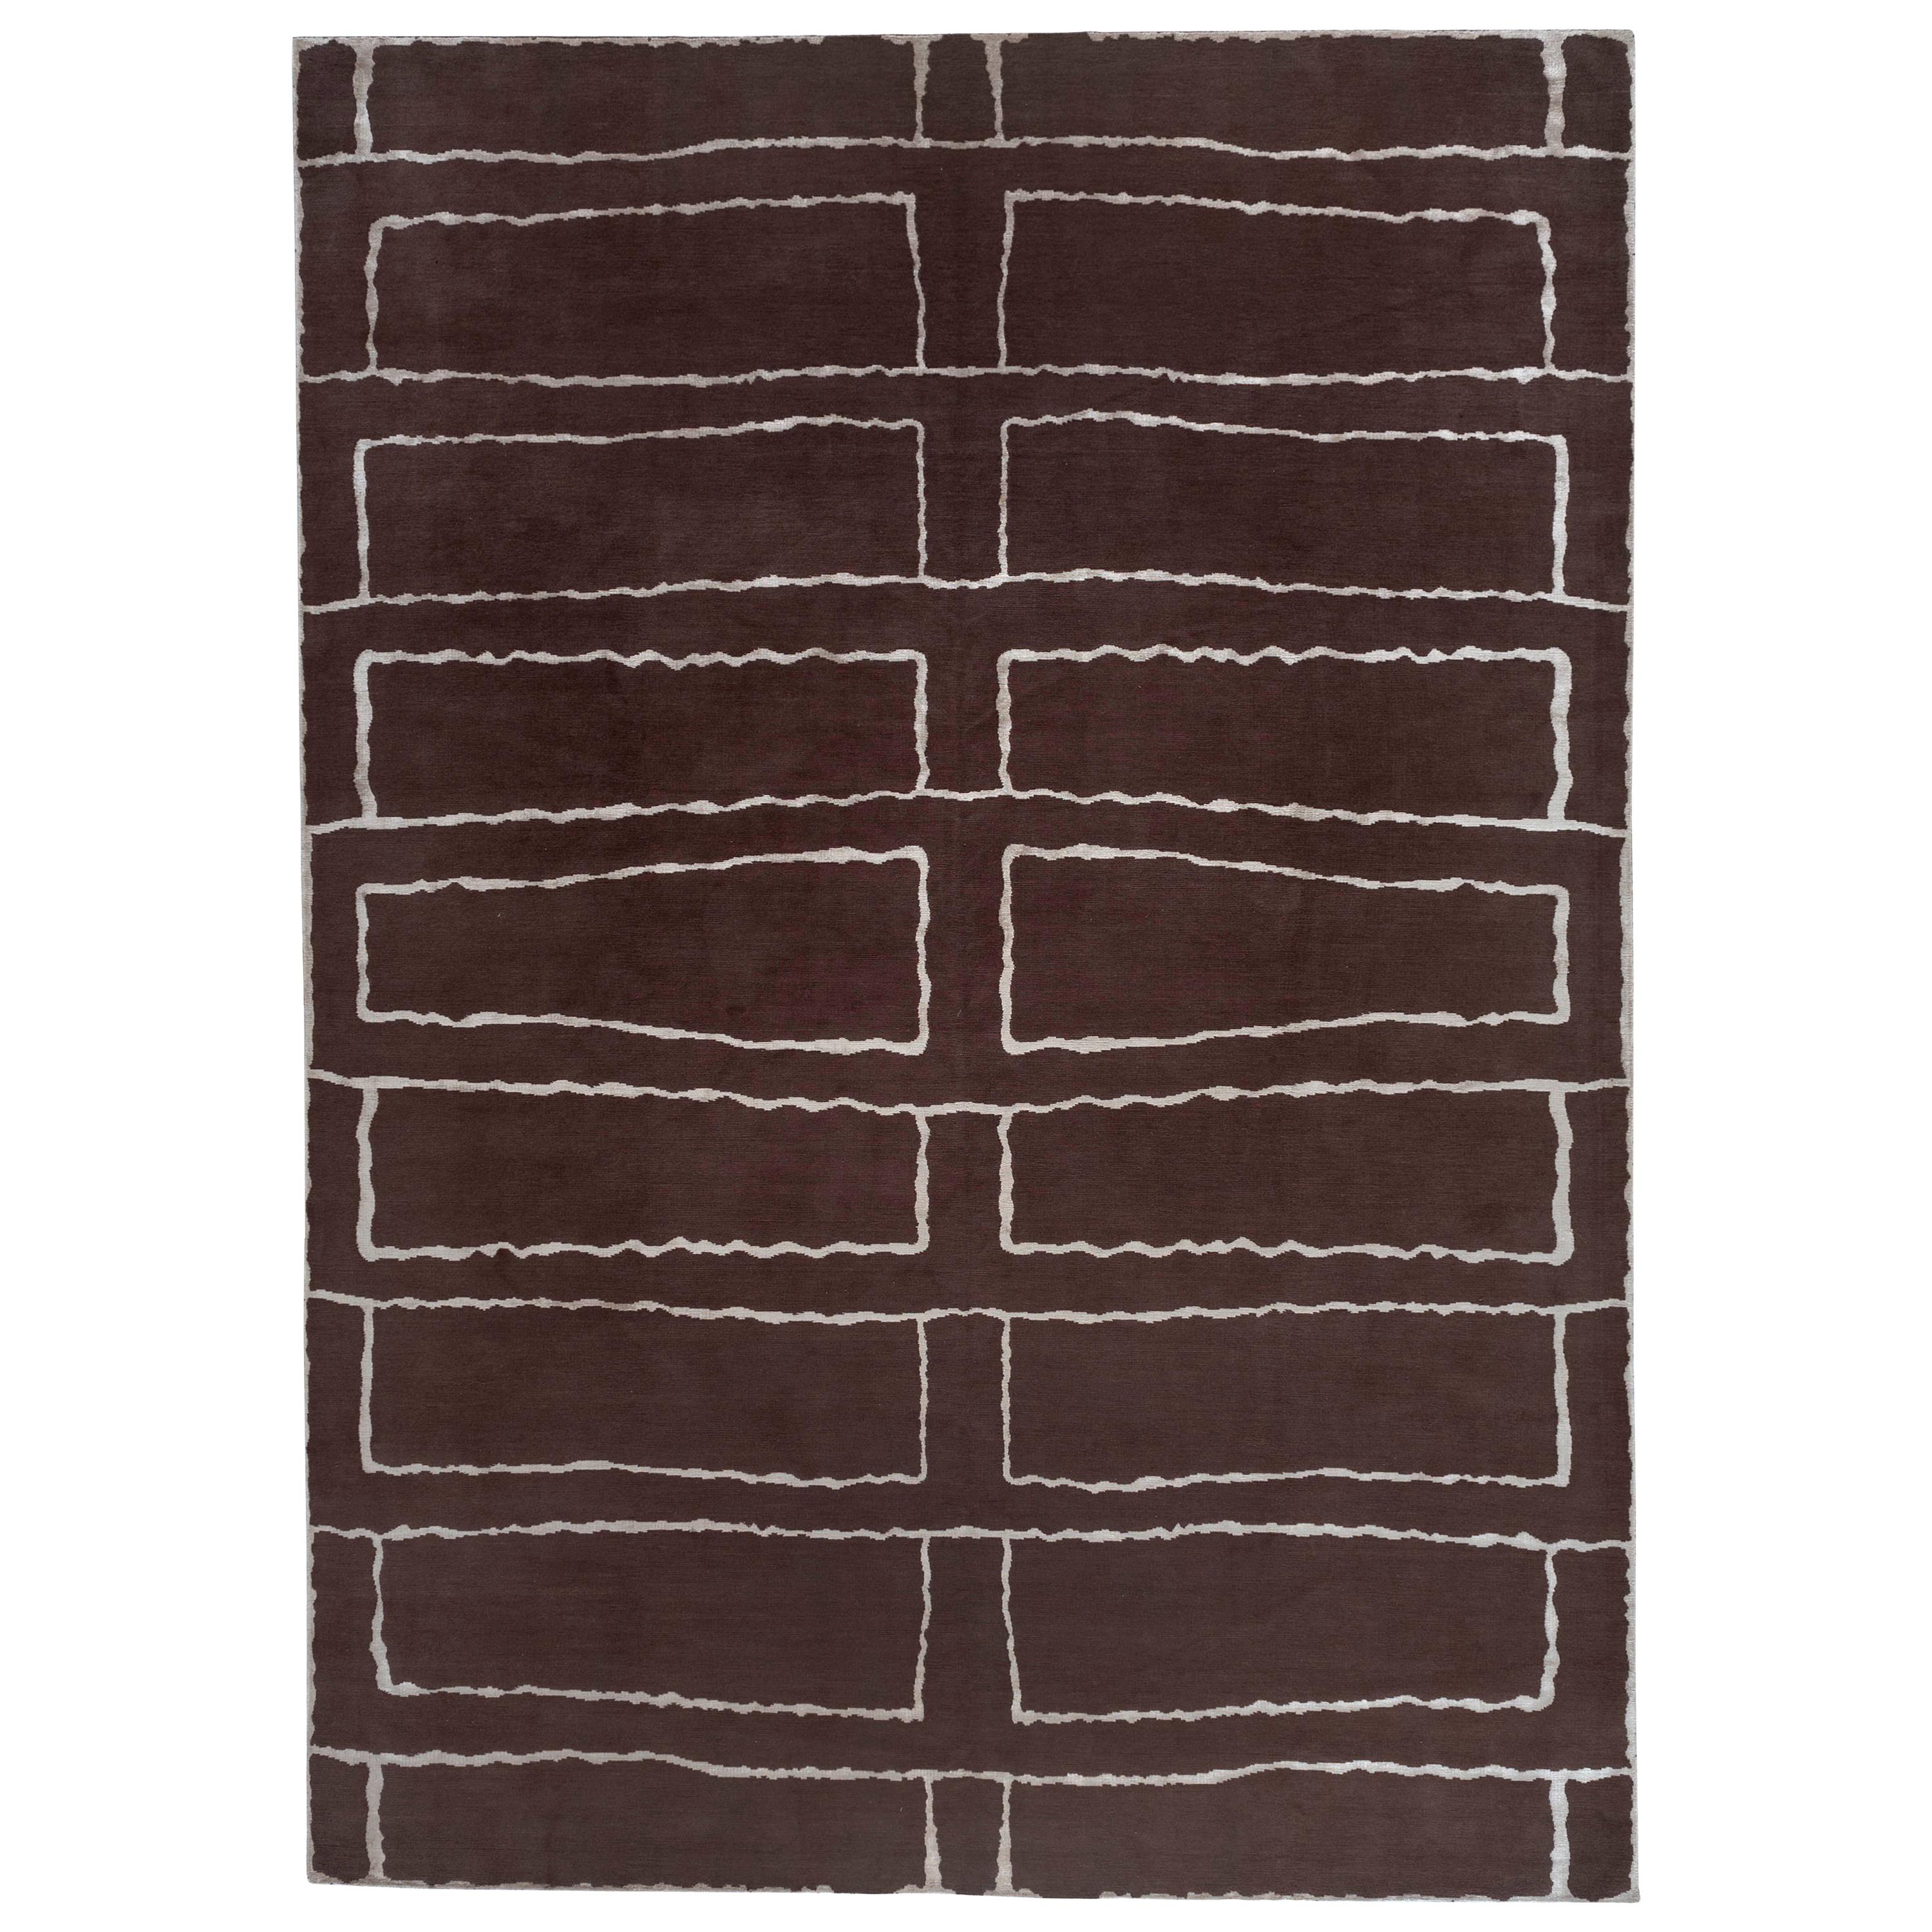 Chocolate and Cream Lines Area Rug For Sale